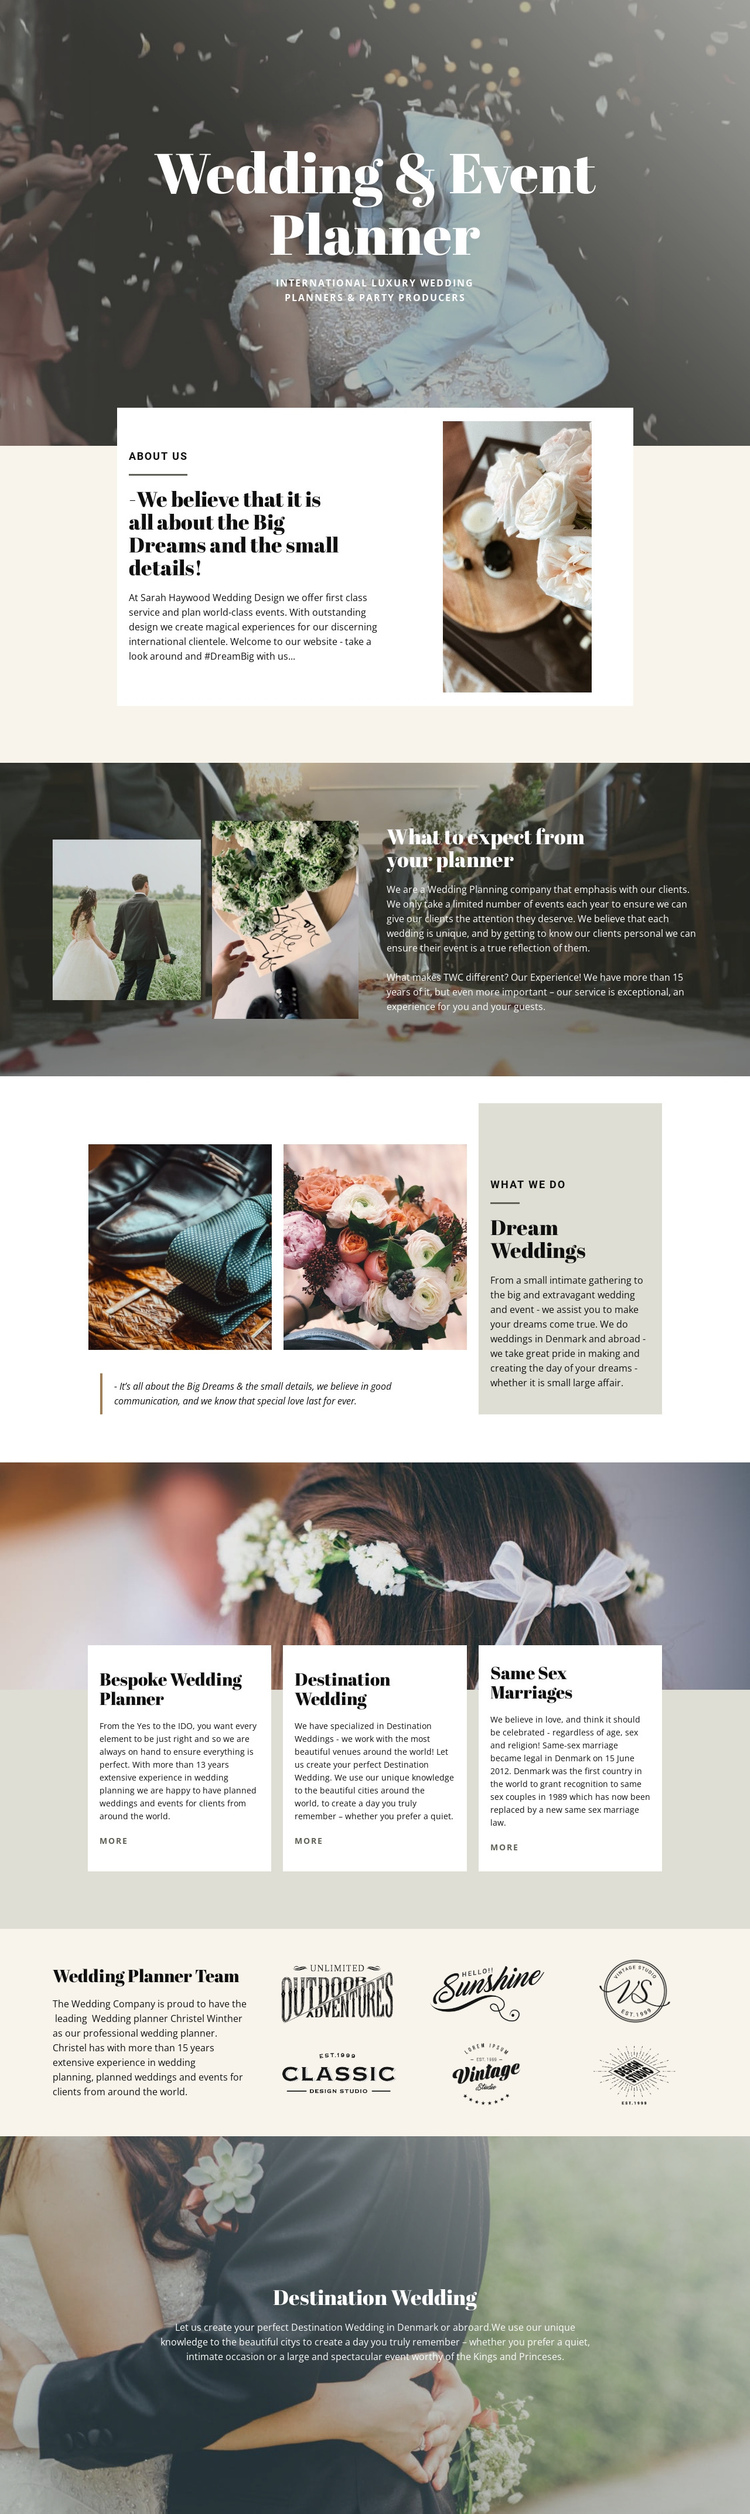 Biggest dream wedding One Page Template